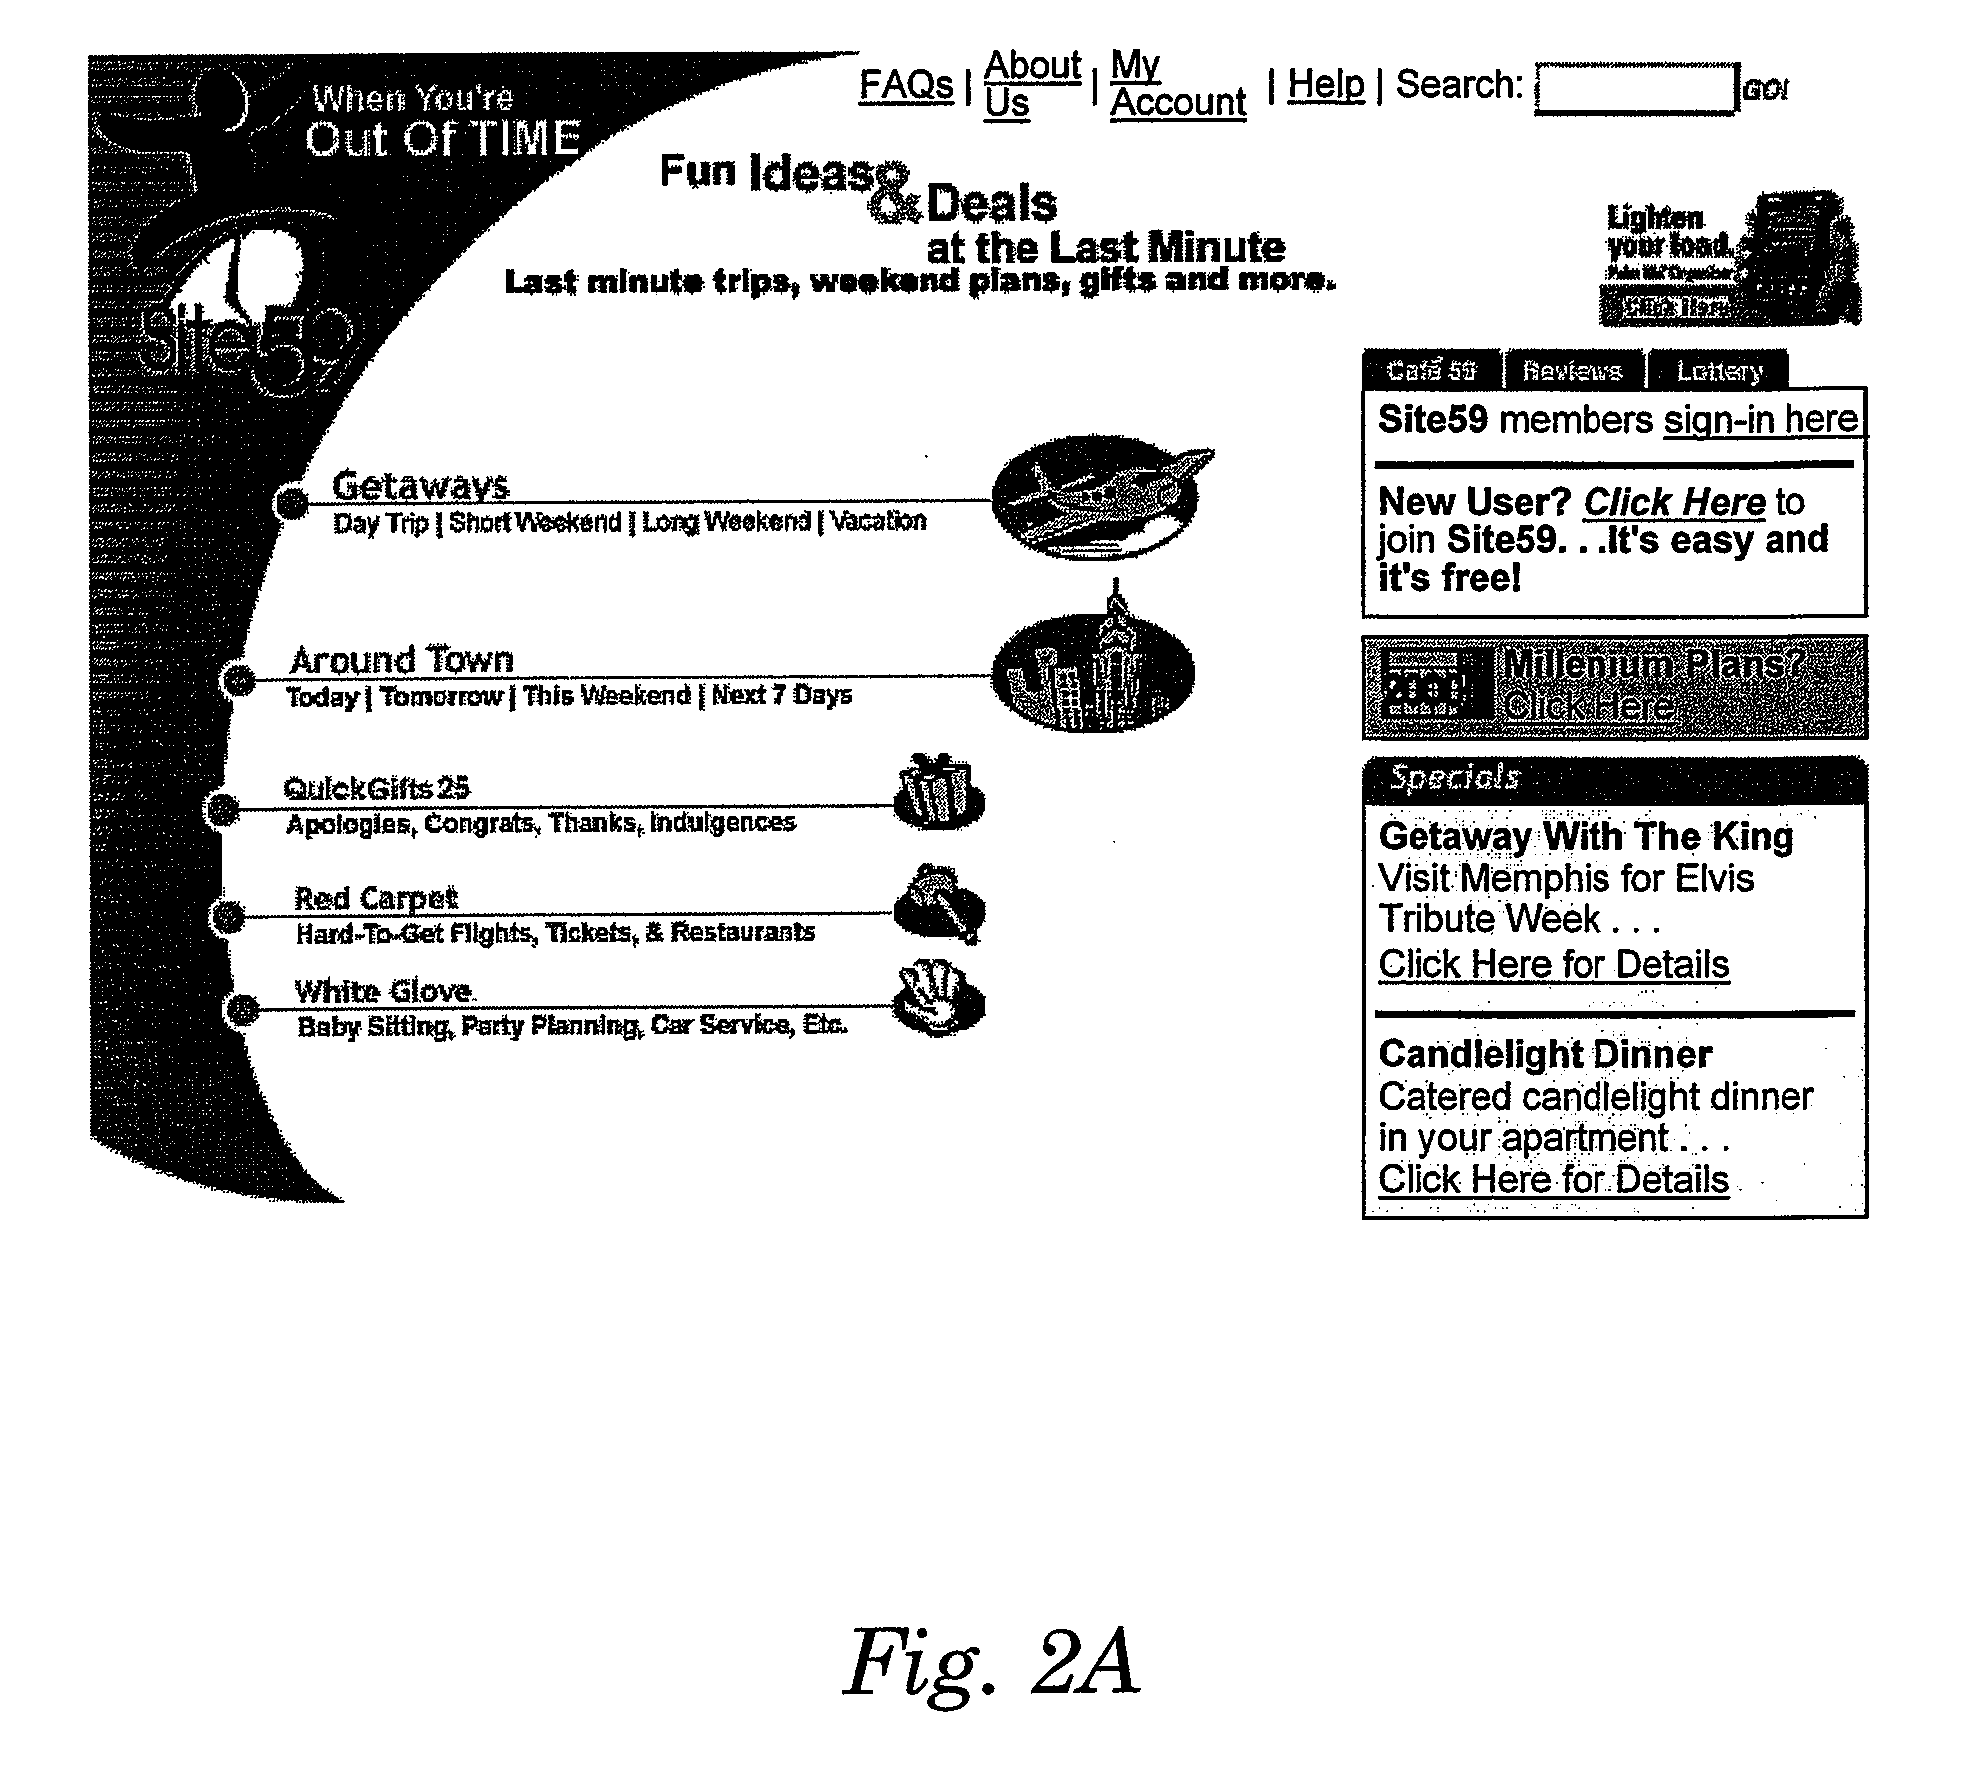 System and Method for Grouping and Selling Products or Services